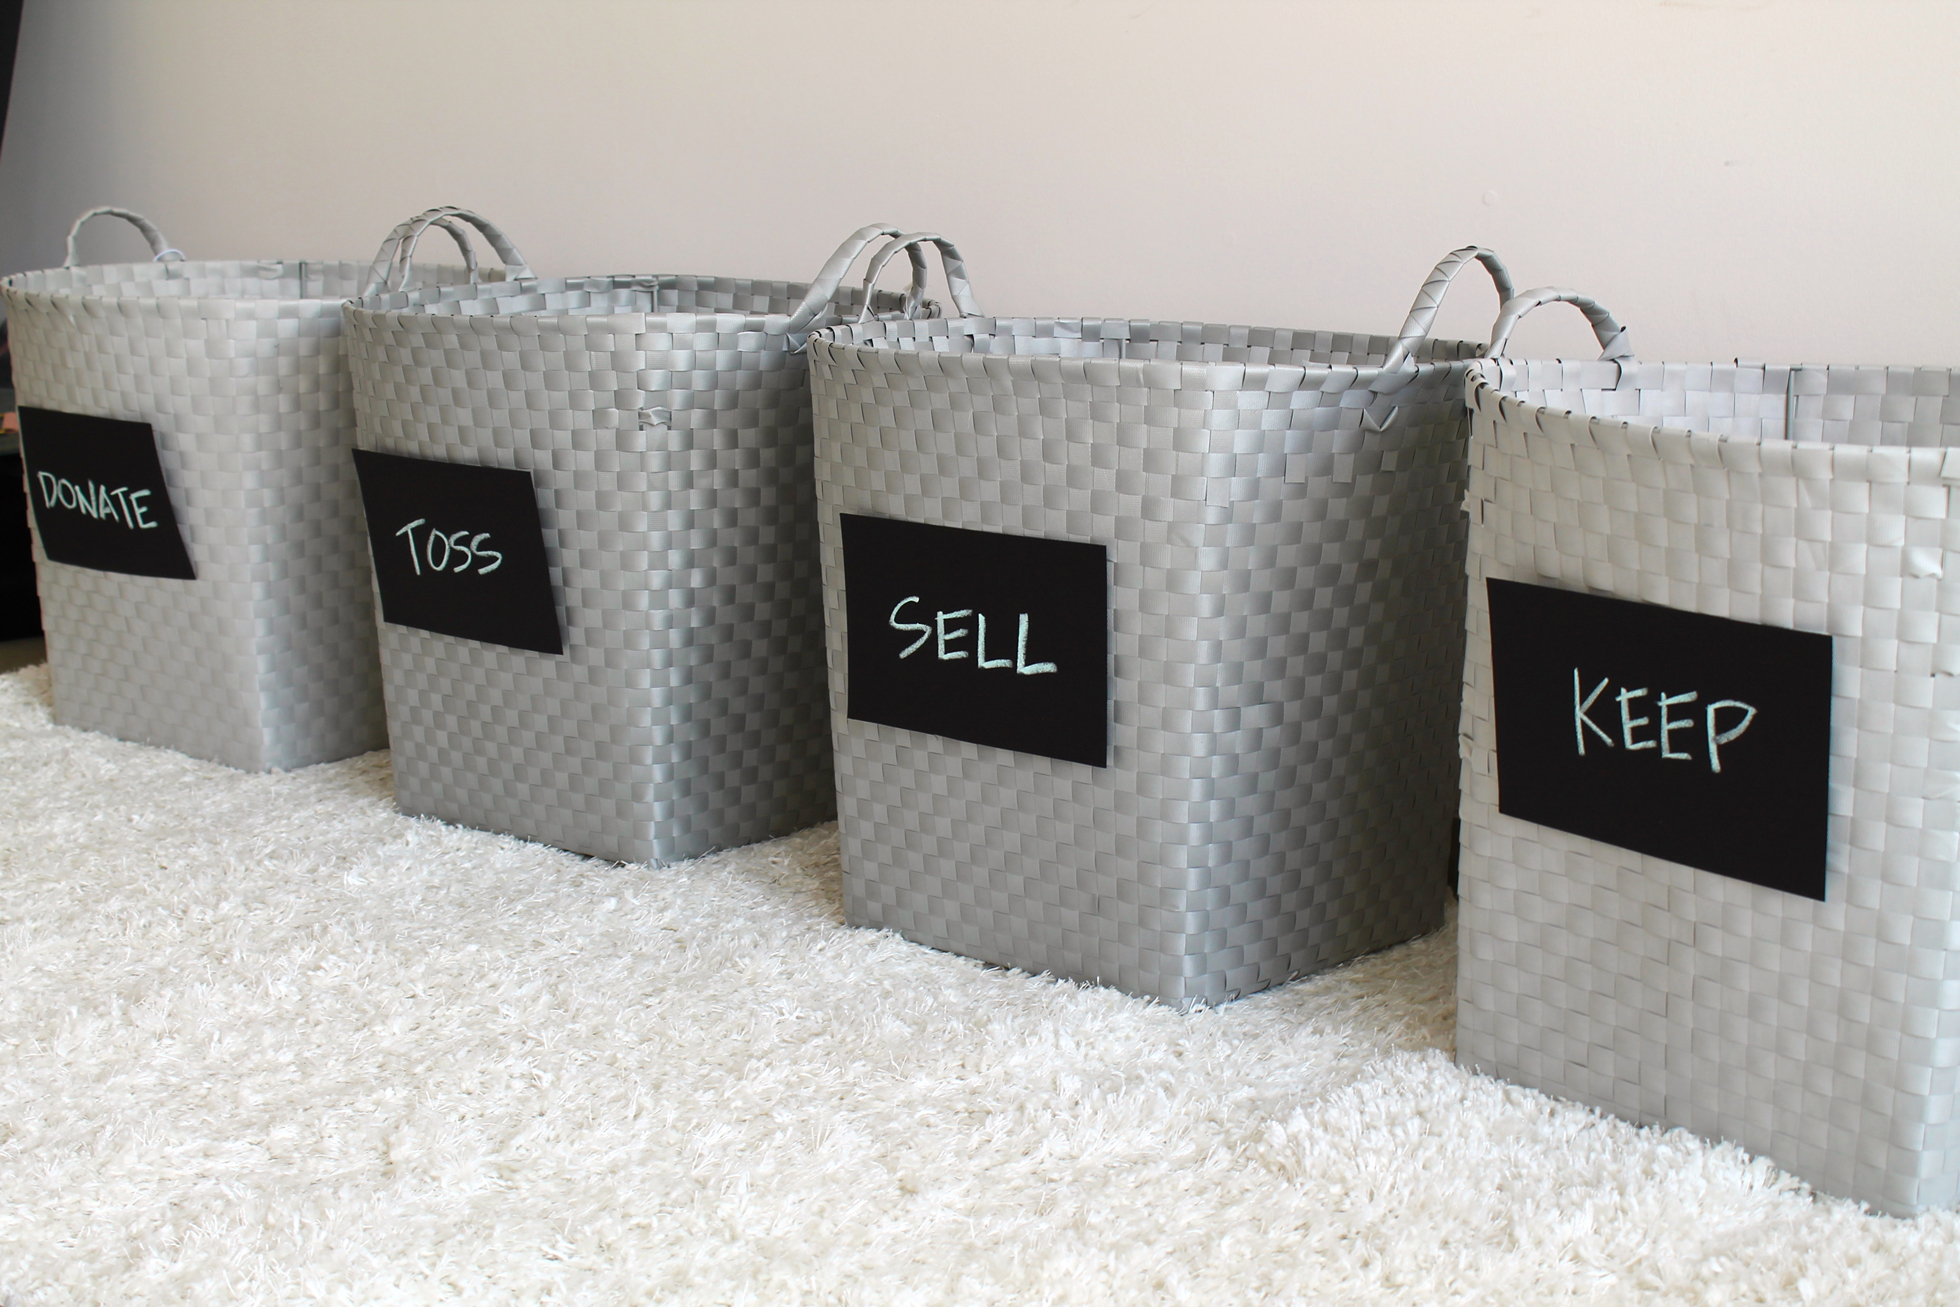 Gray bins labeled with "donate," toss," "sell," and "keep"